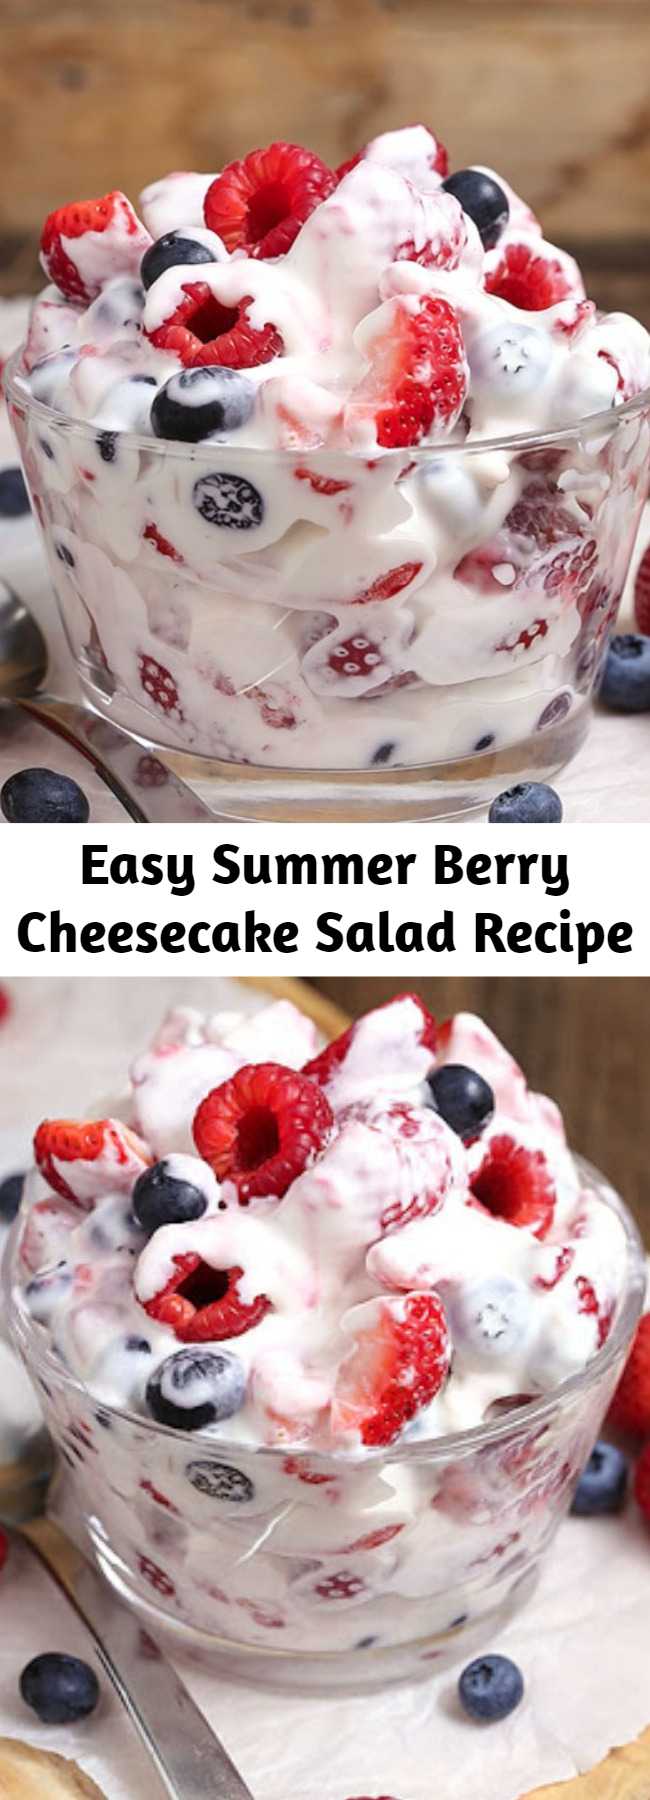 Easy Summer Berry Cheesecake Salad Recipe - This simple Summer Berry Cheesecake Salad recipe comes together with just 5 ingredients. Rich and creamy cheesecake filling is folded into your favorite berries to create the most amazing fruit salad ever! Your family will go nuts over it. #summer